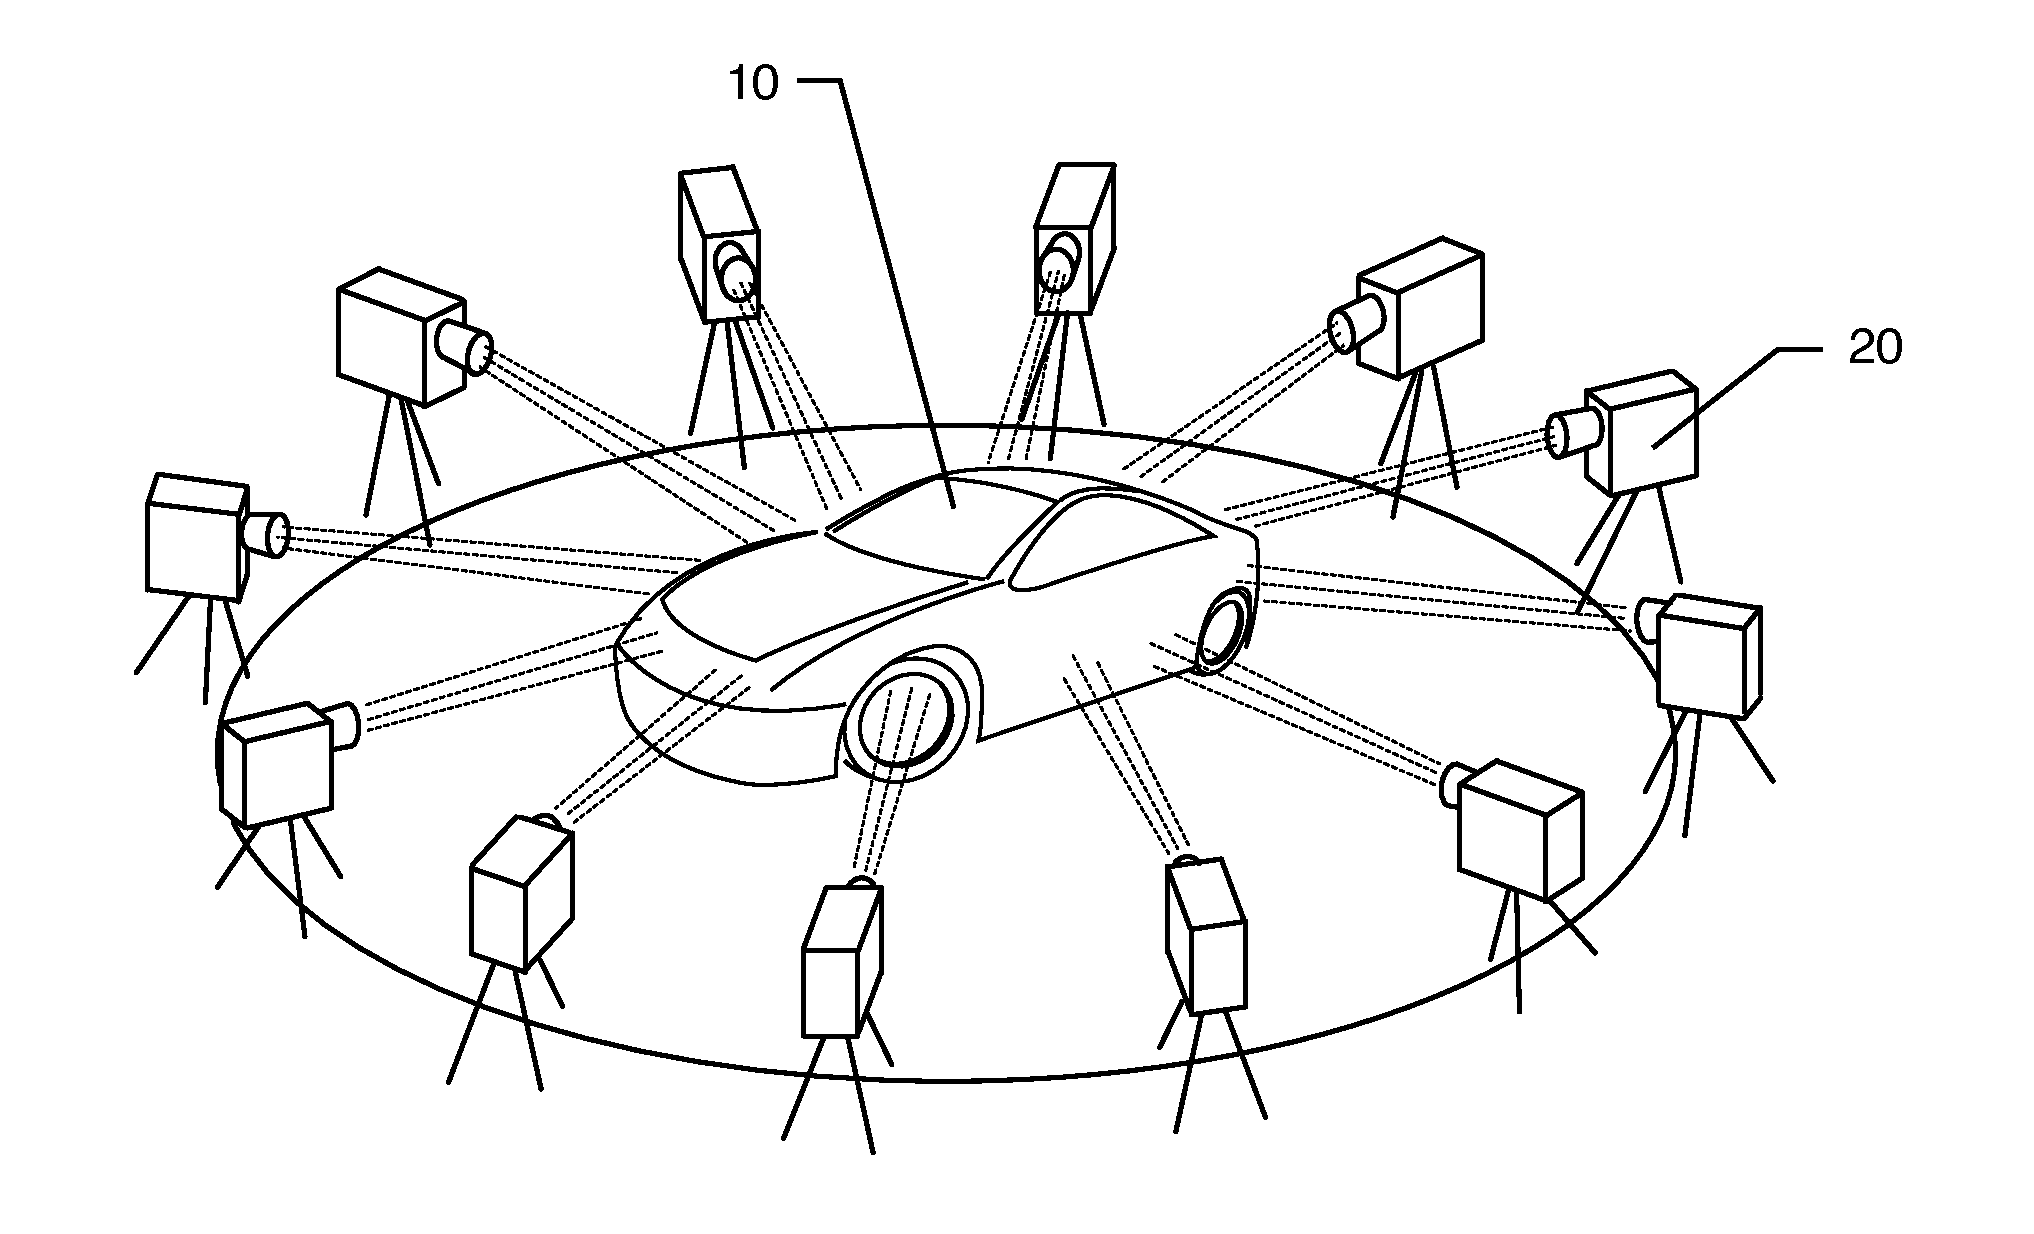 Systems and methods for creating three-dimensional image media